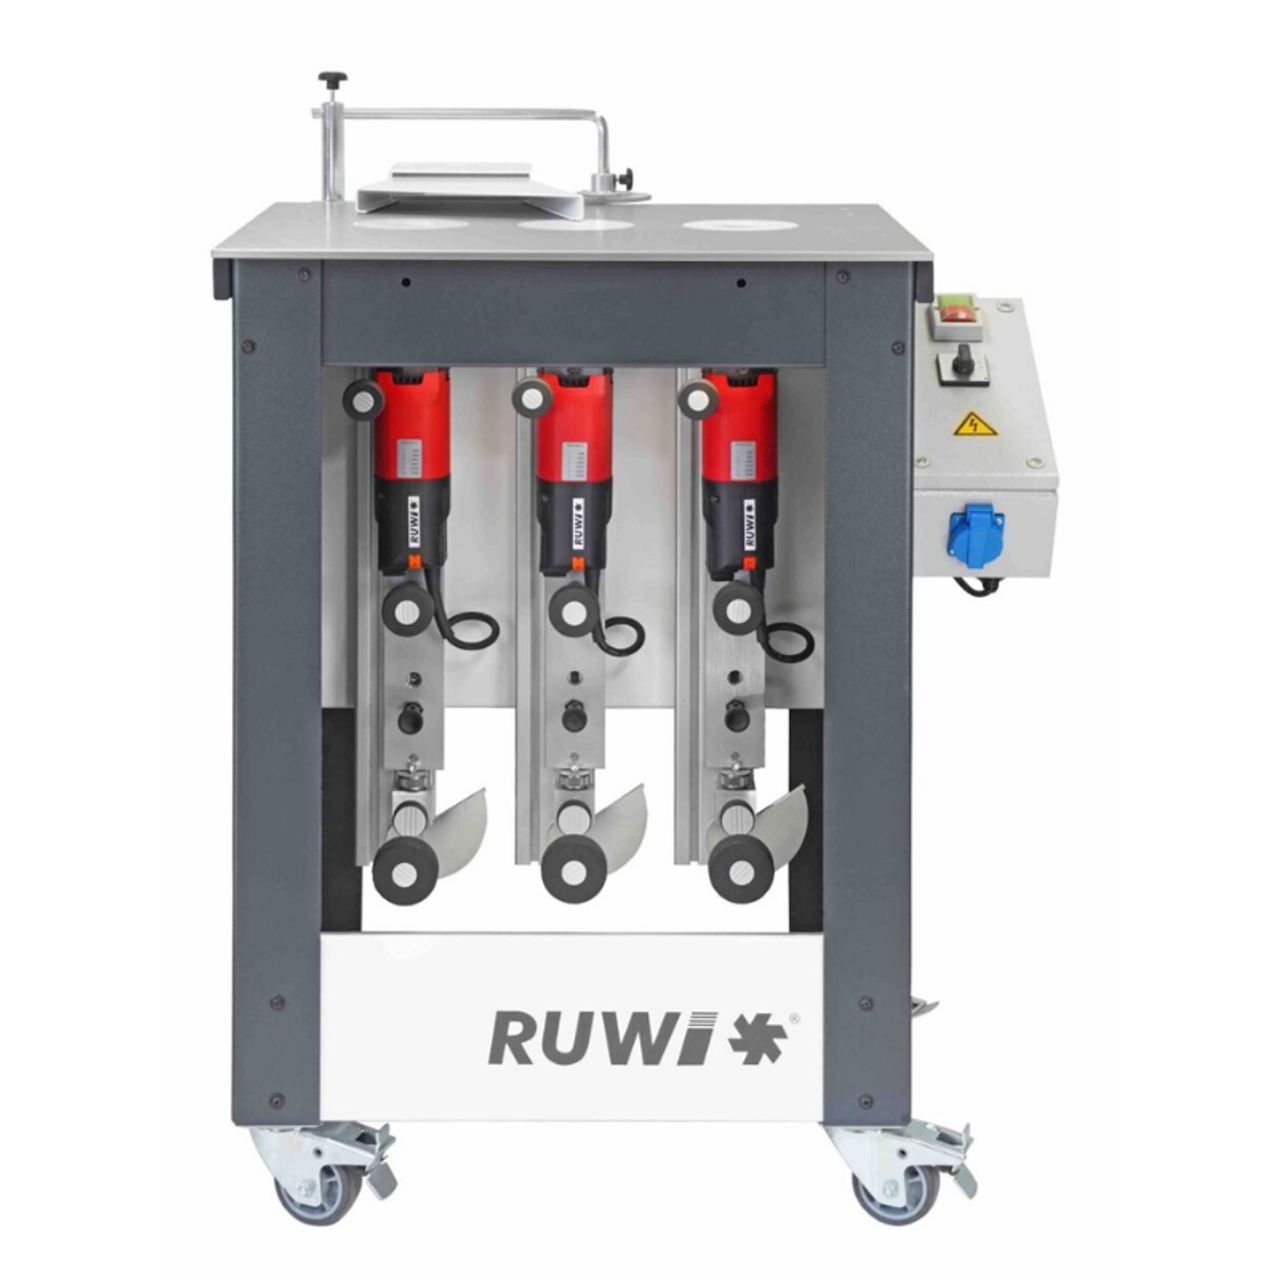 Craftsman Hardware supplies Router Table such as RUWI Router Table for Performance for  6, 8, 10, 12mm Collets for the Woodworking Industry in Australia and New Zealand